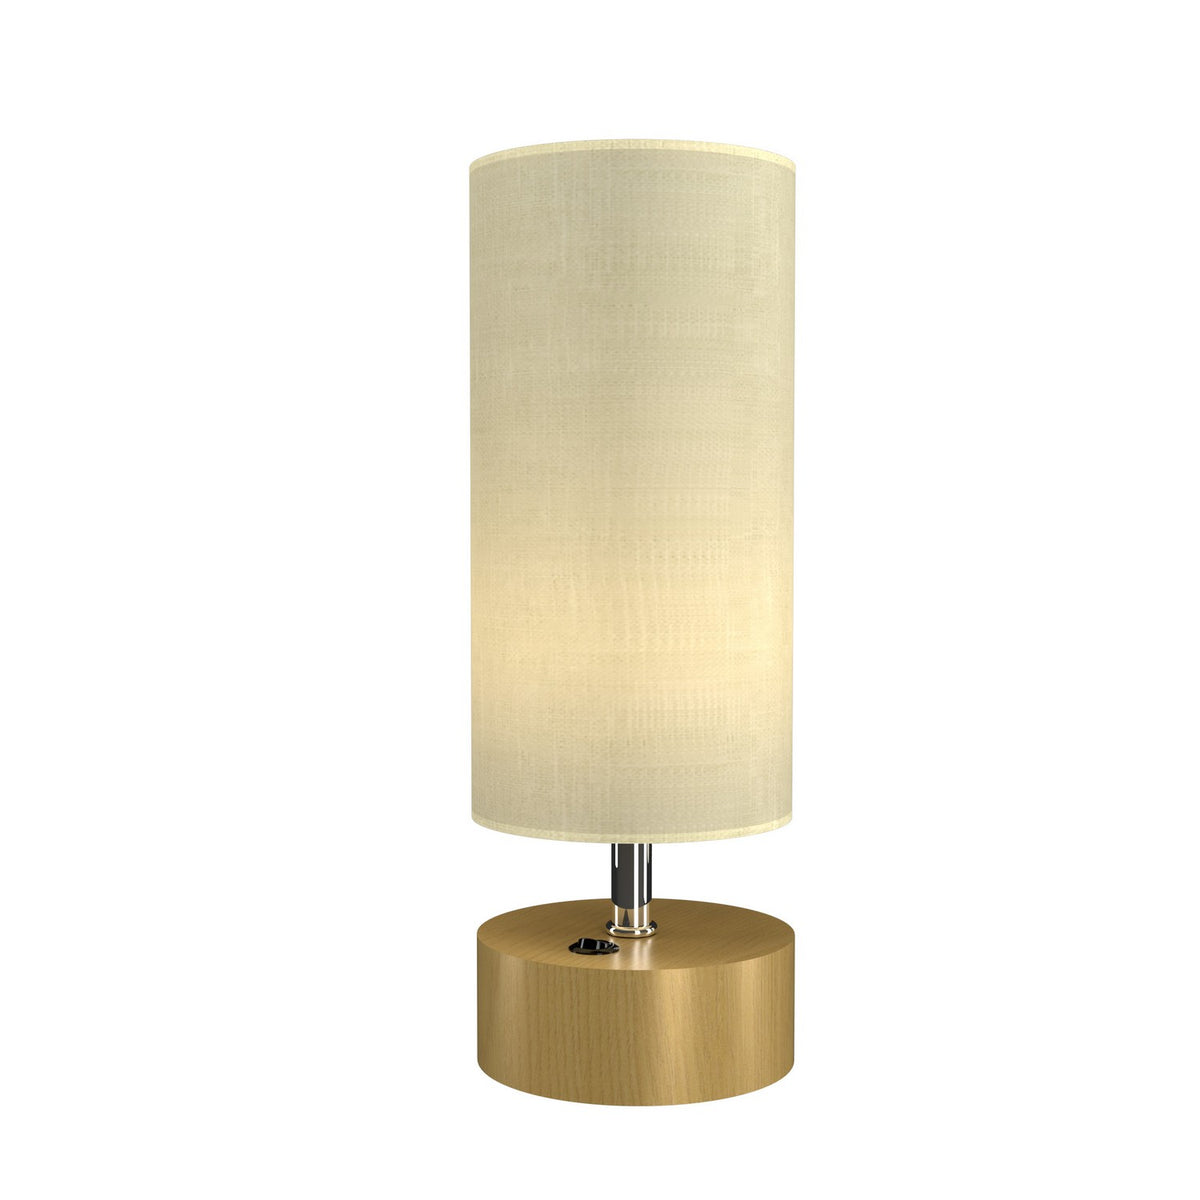 Accord Lighting - 7100.49 - LED Table Lamp - Clean - Organic Gold